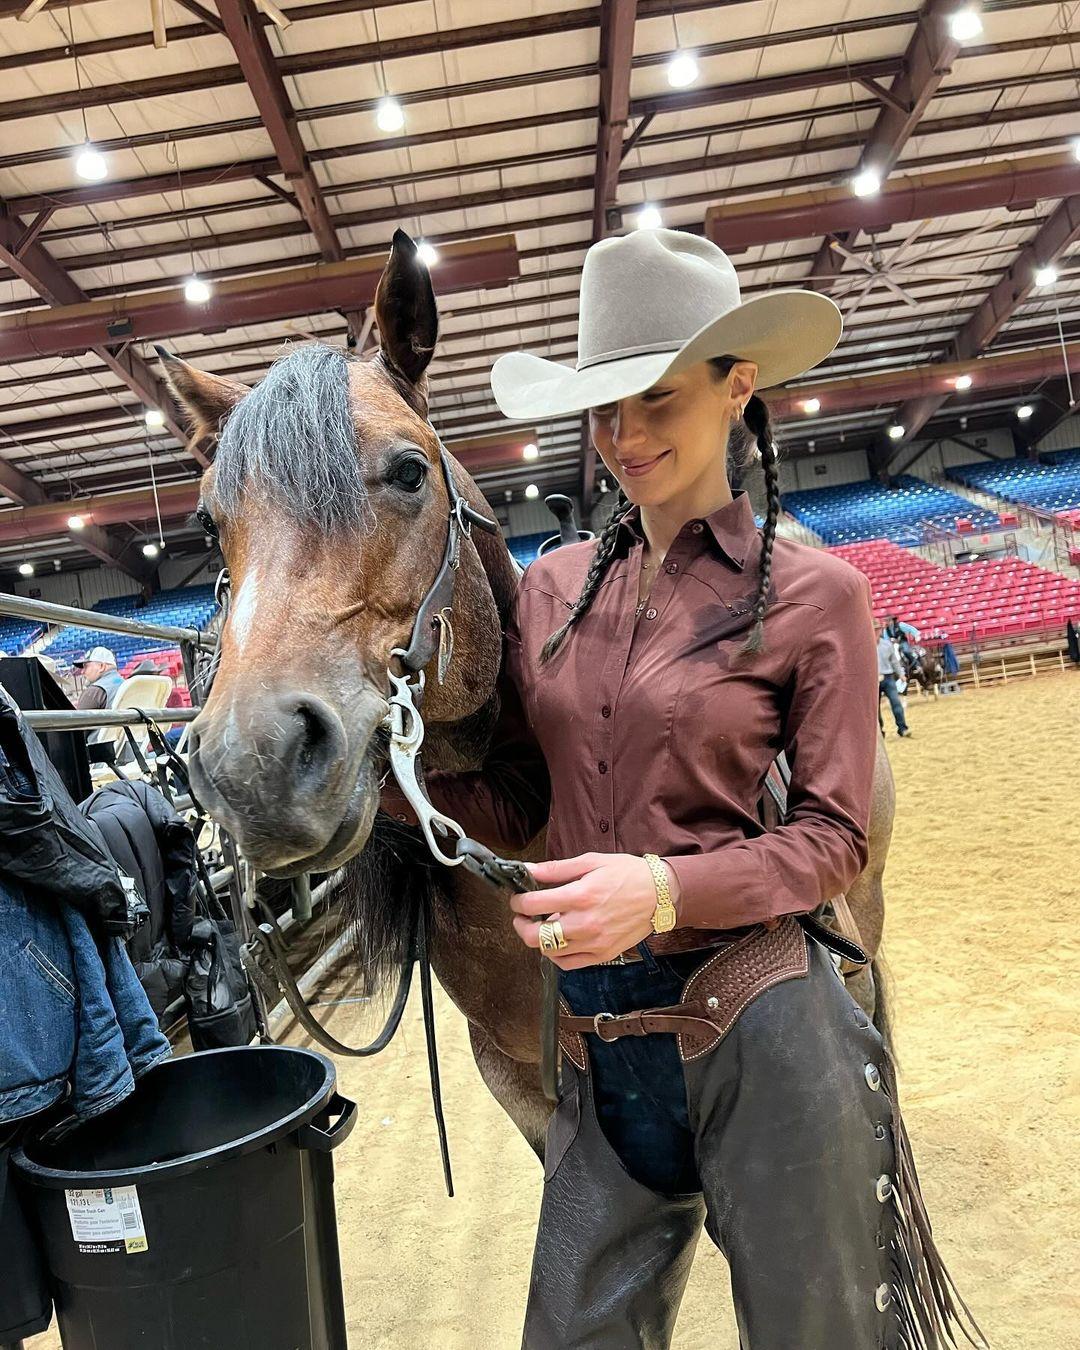 Best boy! Qualified for our first finals together❤️